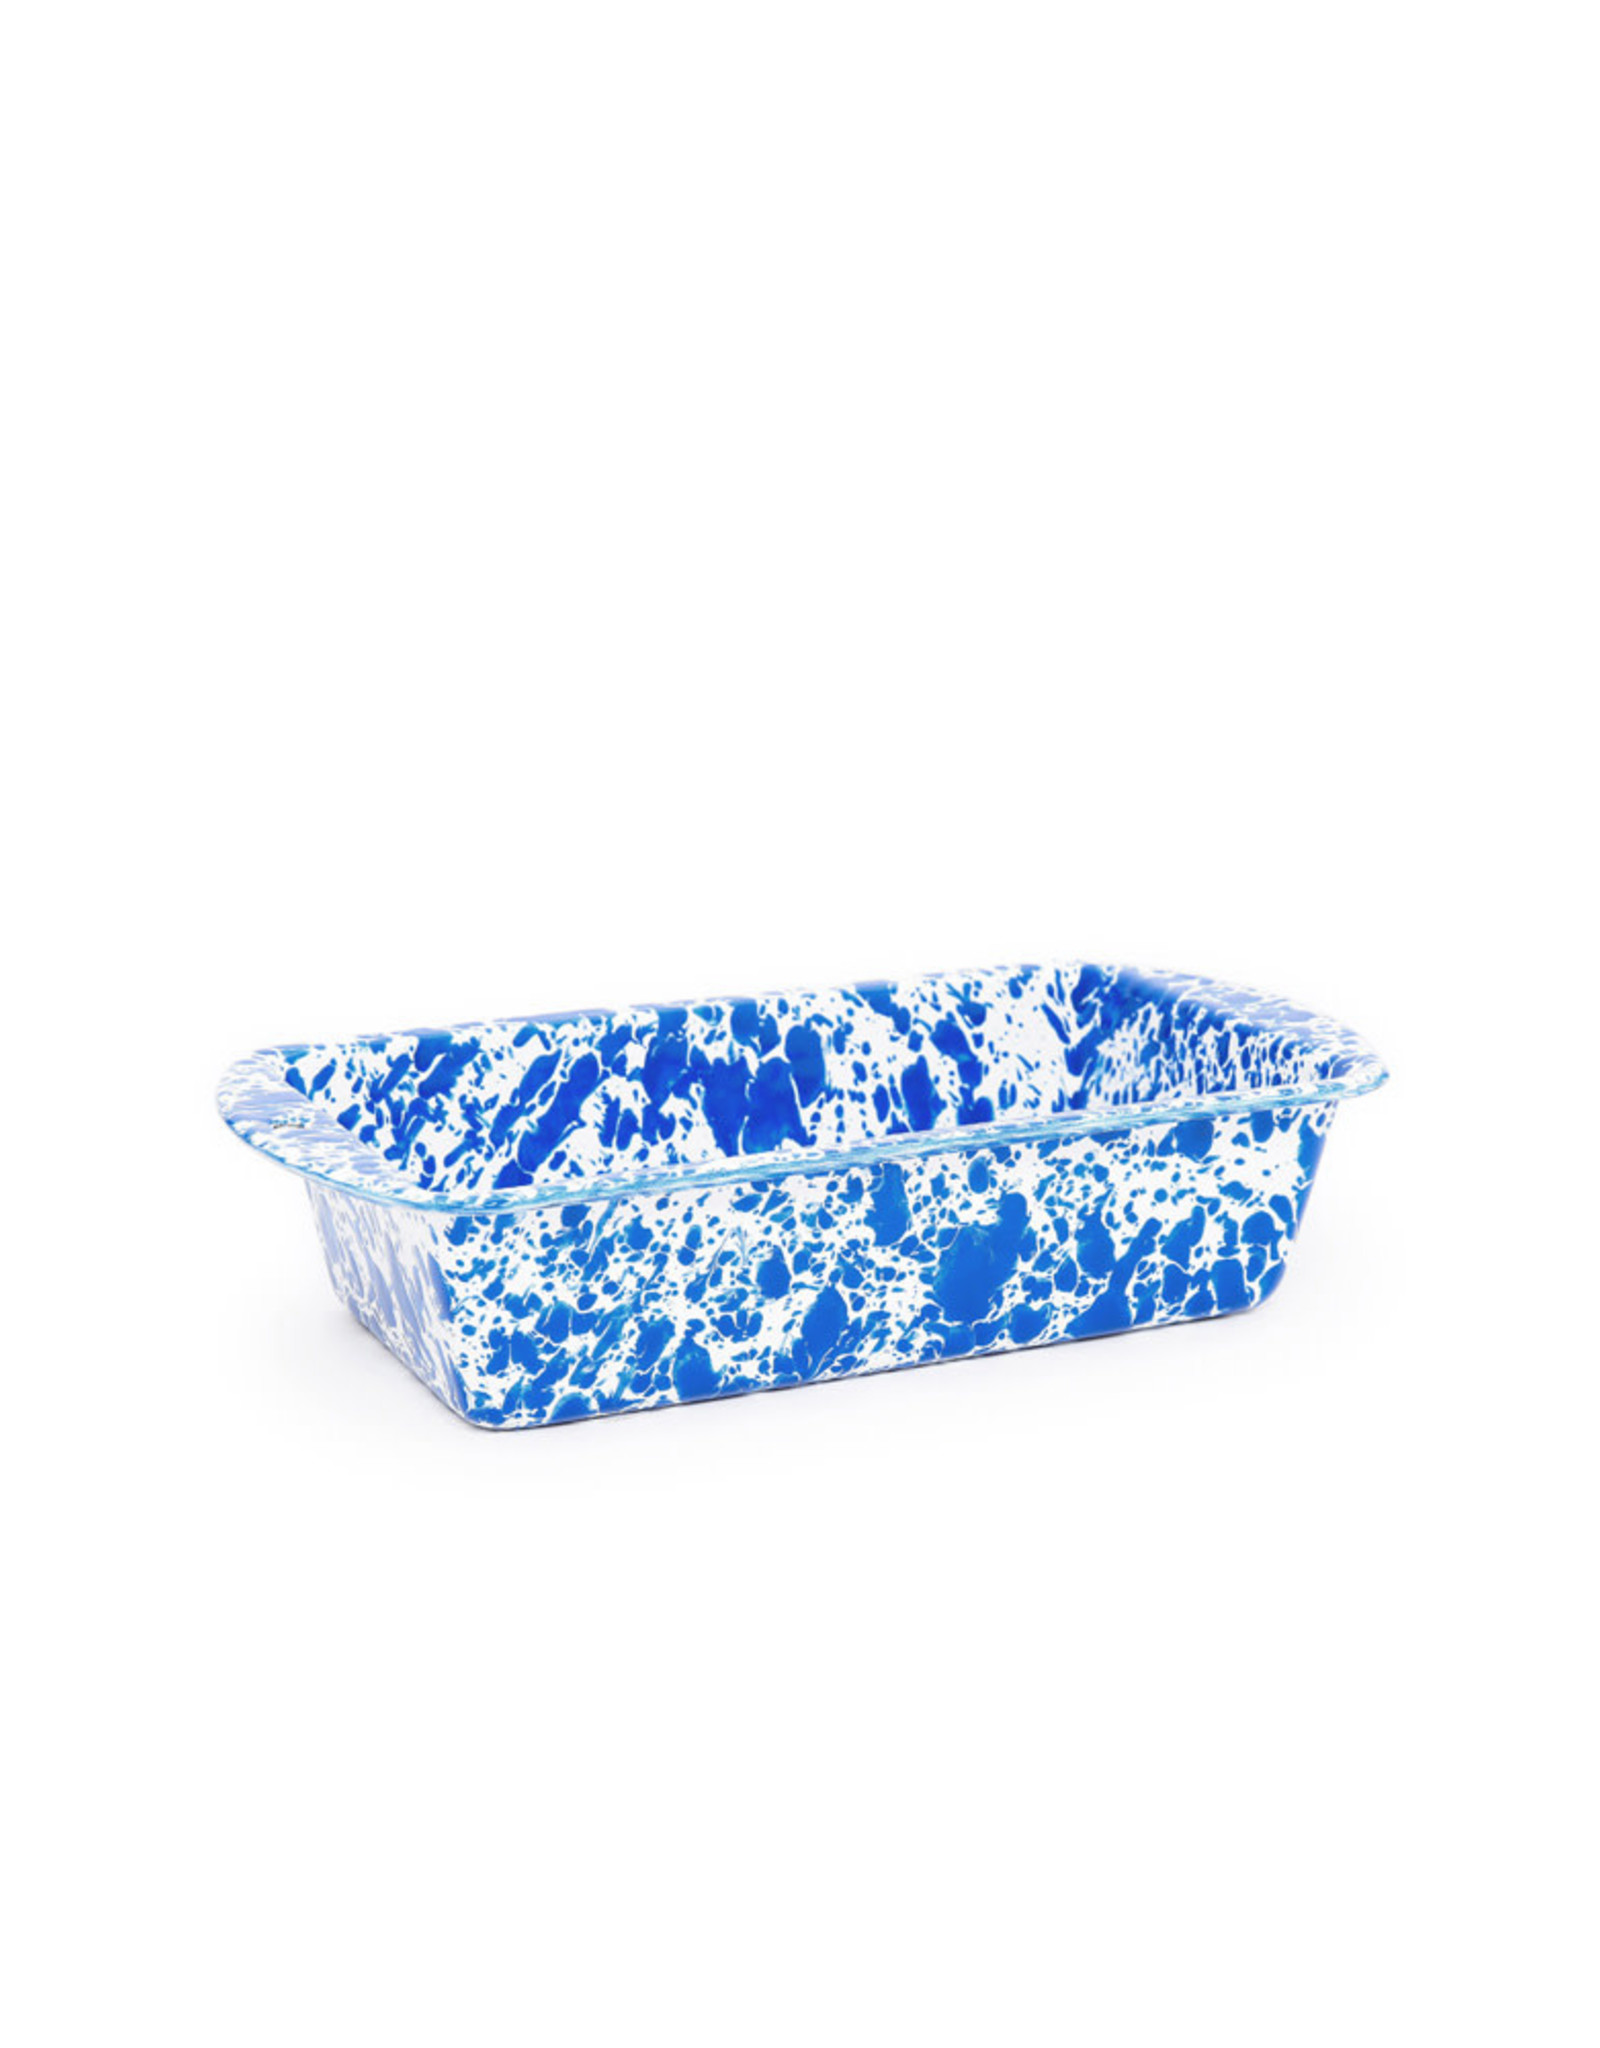 Kitchen Crow Canyon - Blue Marble Loaf Pan